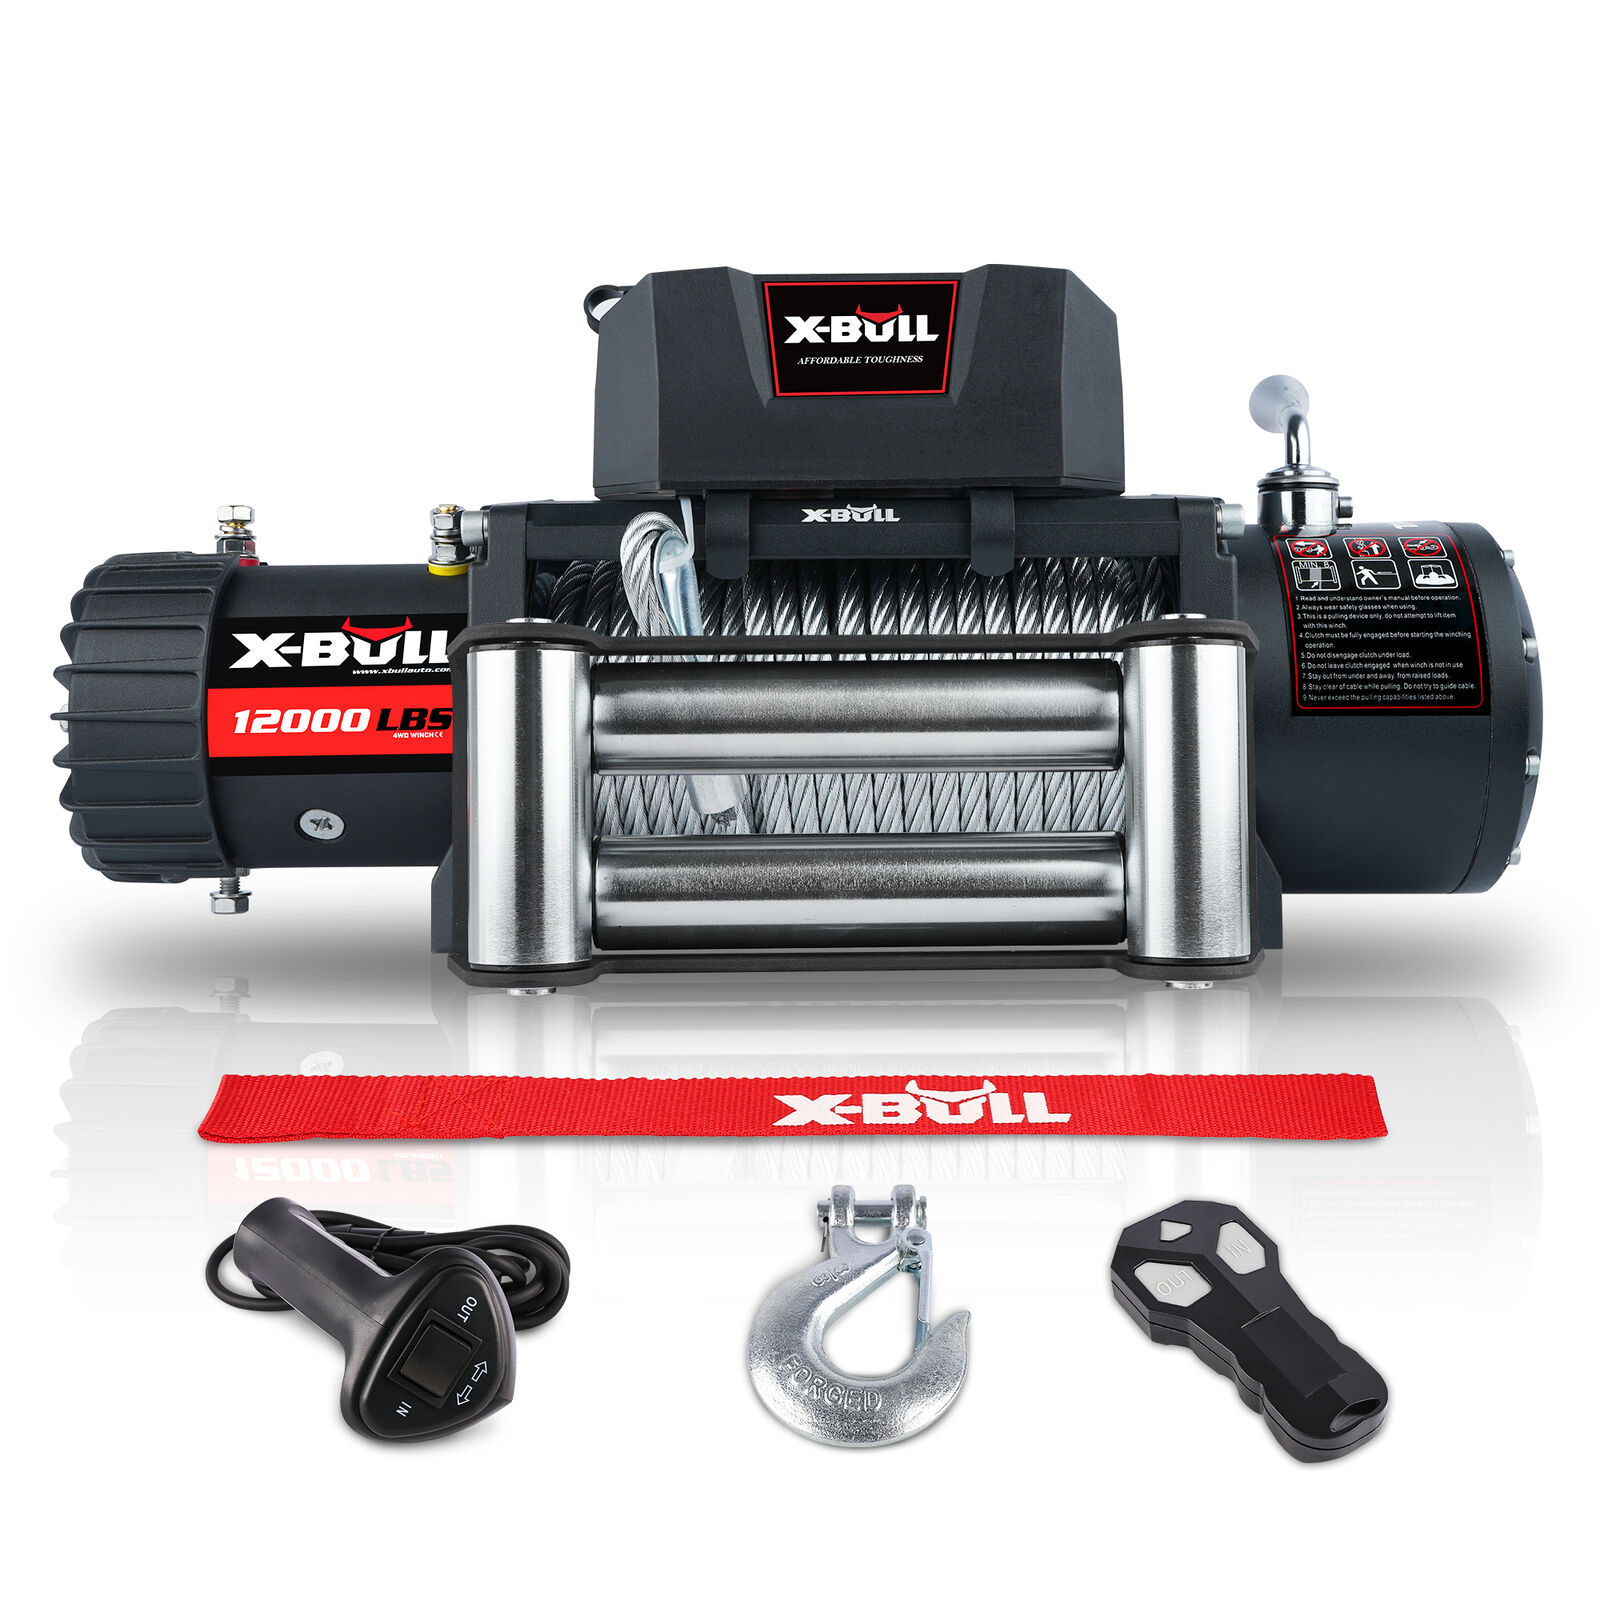 X-BULL Electric Winch 12000LBS 12V Steel Cable Truck Trailer Towing Off Road 4WD